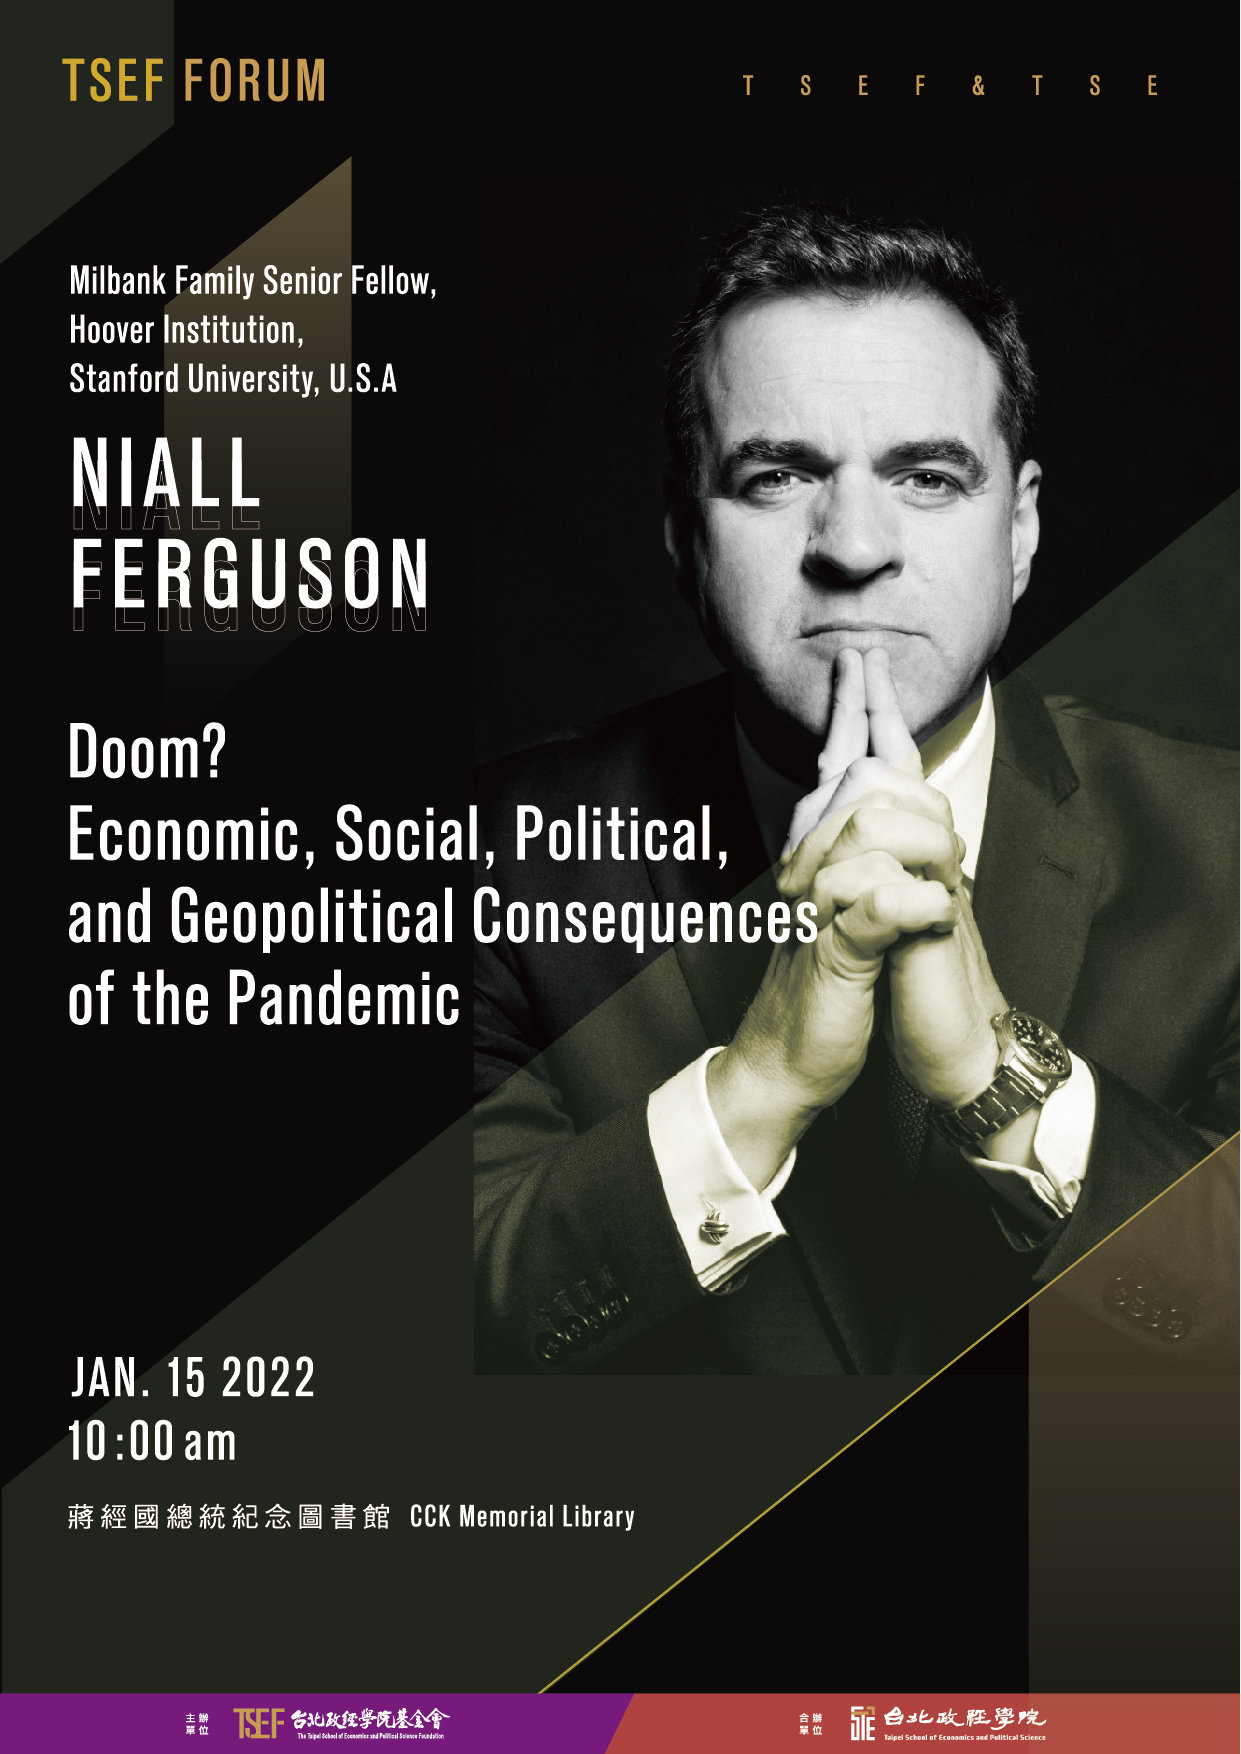 Forum | Doom? Economic, Social, Political, and Geopolitical Consequences of the Pandemic